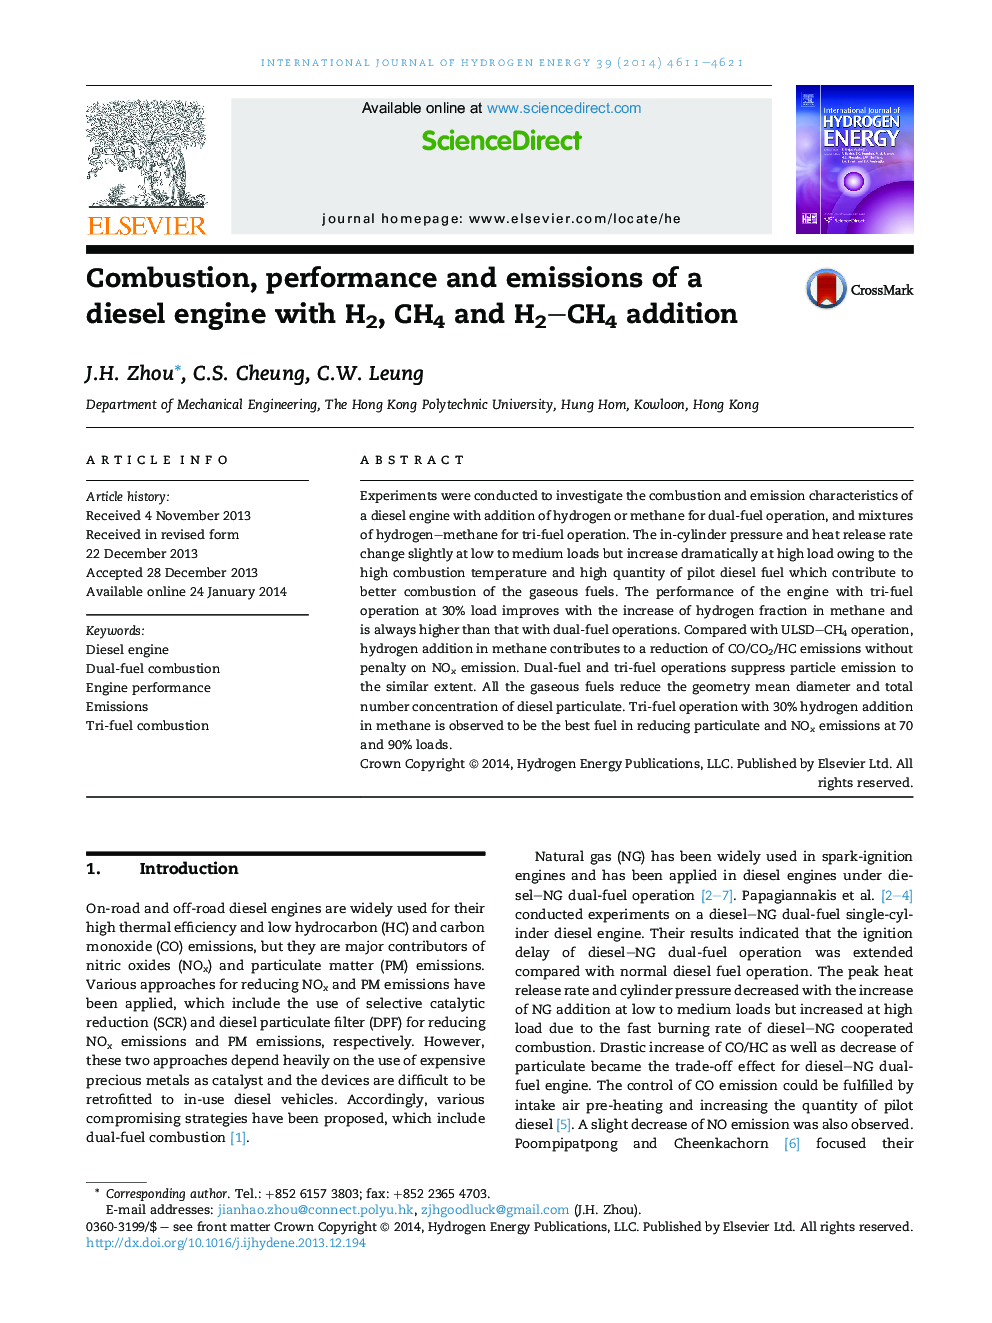 Combustion, performance and emissions of a diesel engine with H2, CH4 and H2–CH4 addition